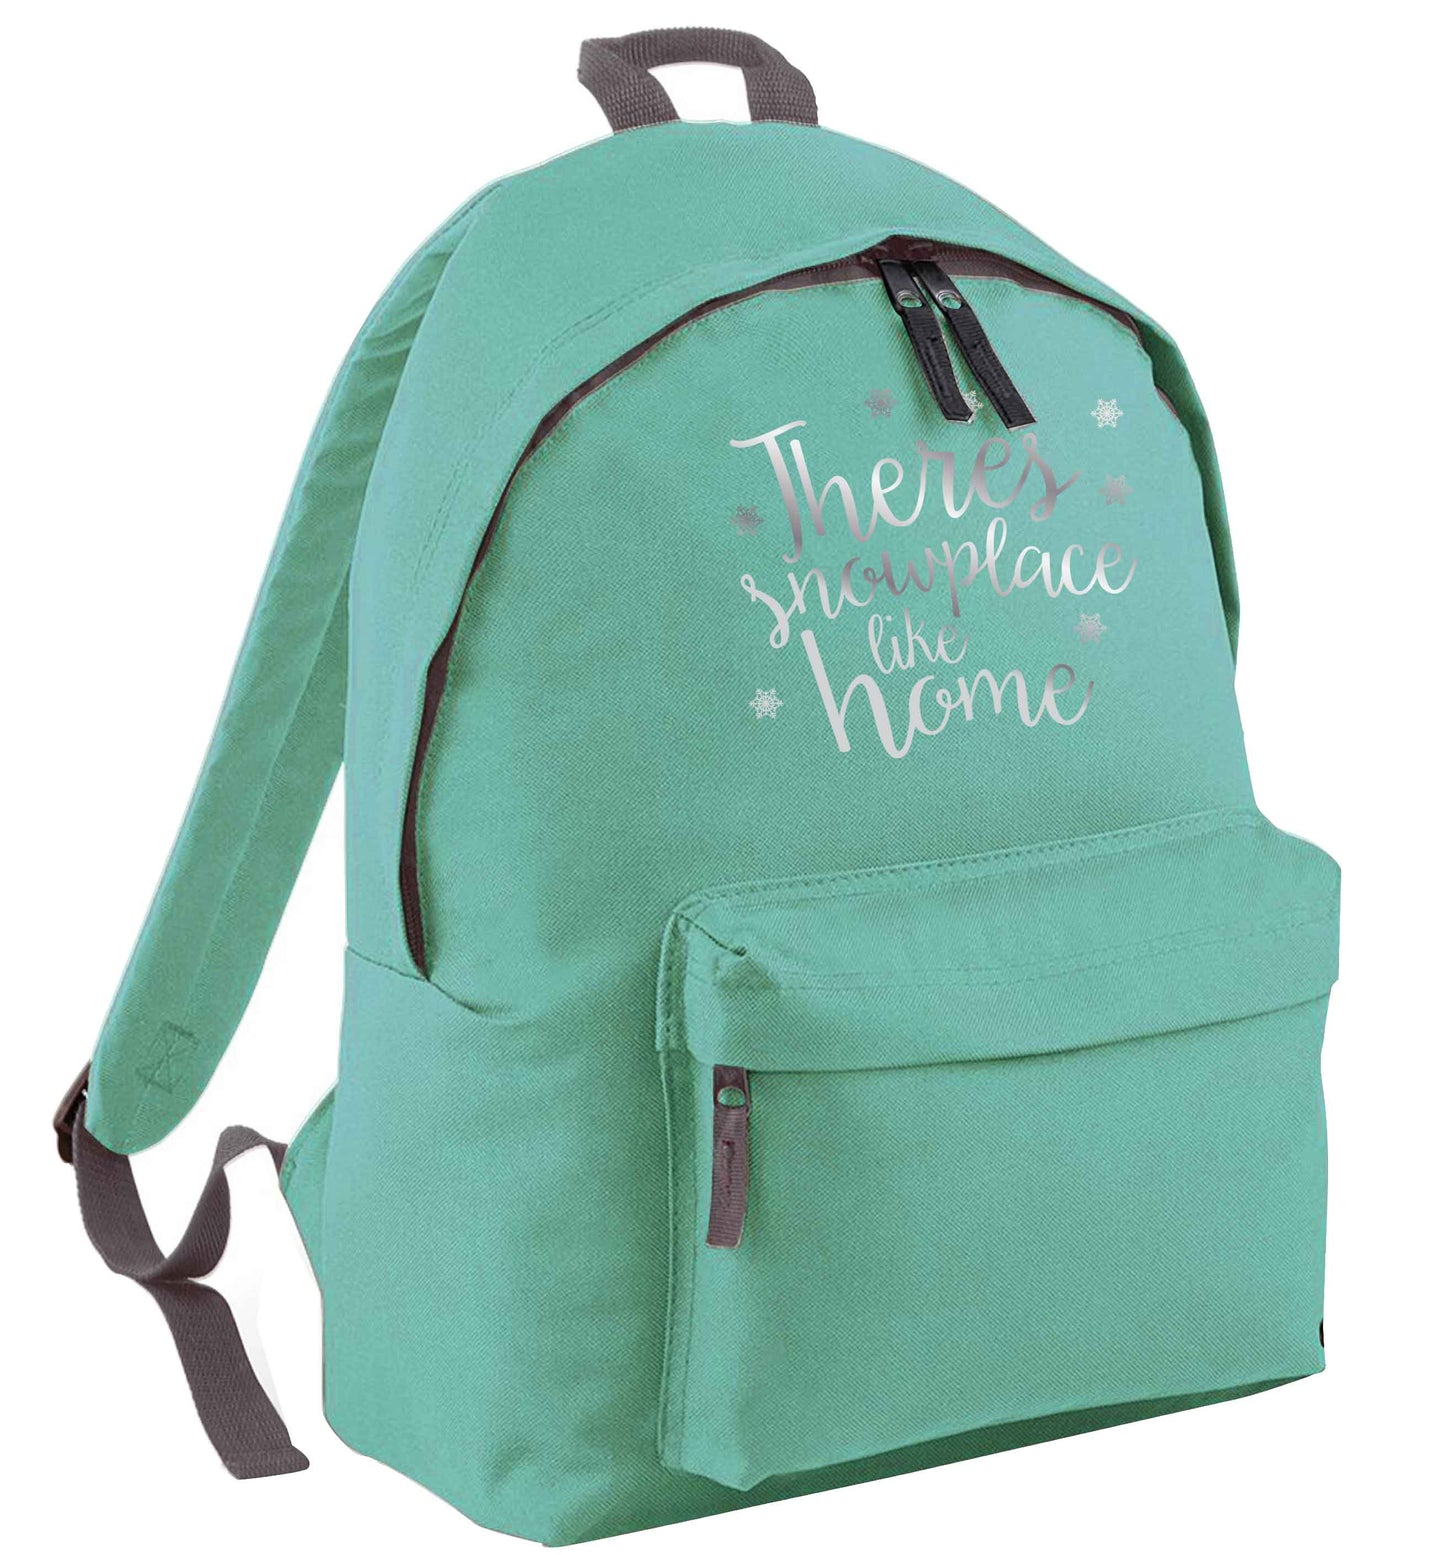 There's snowplace like home - metallic silver mint adults backpack